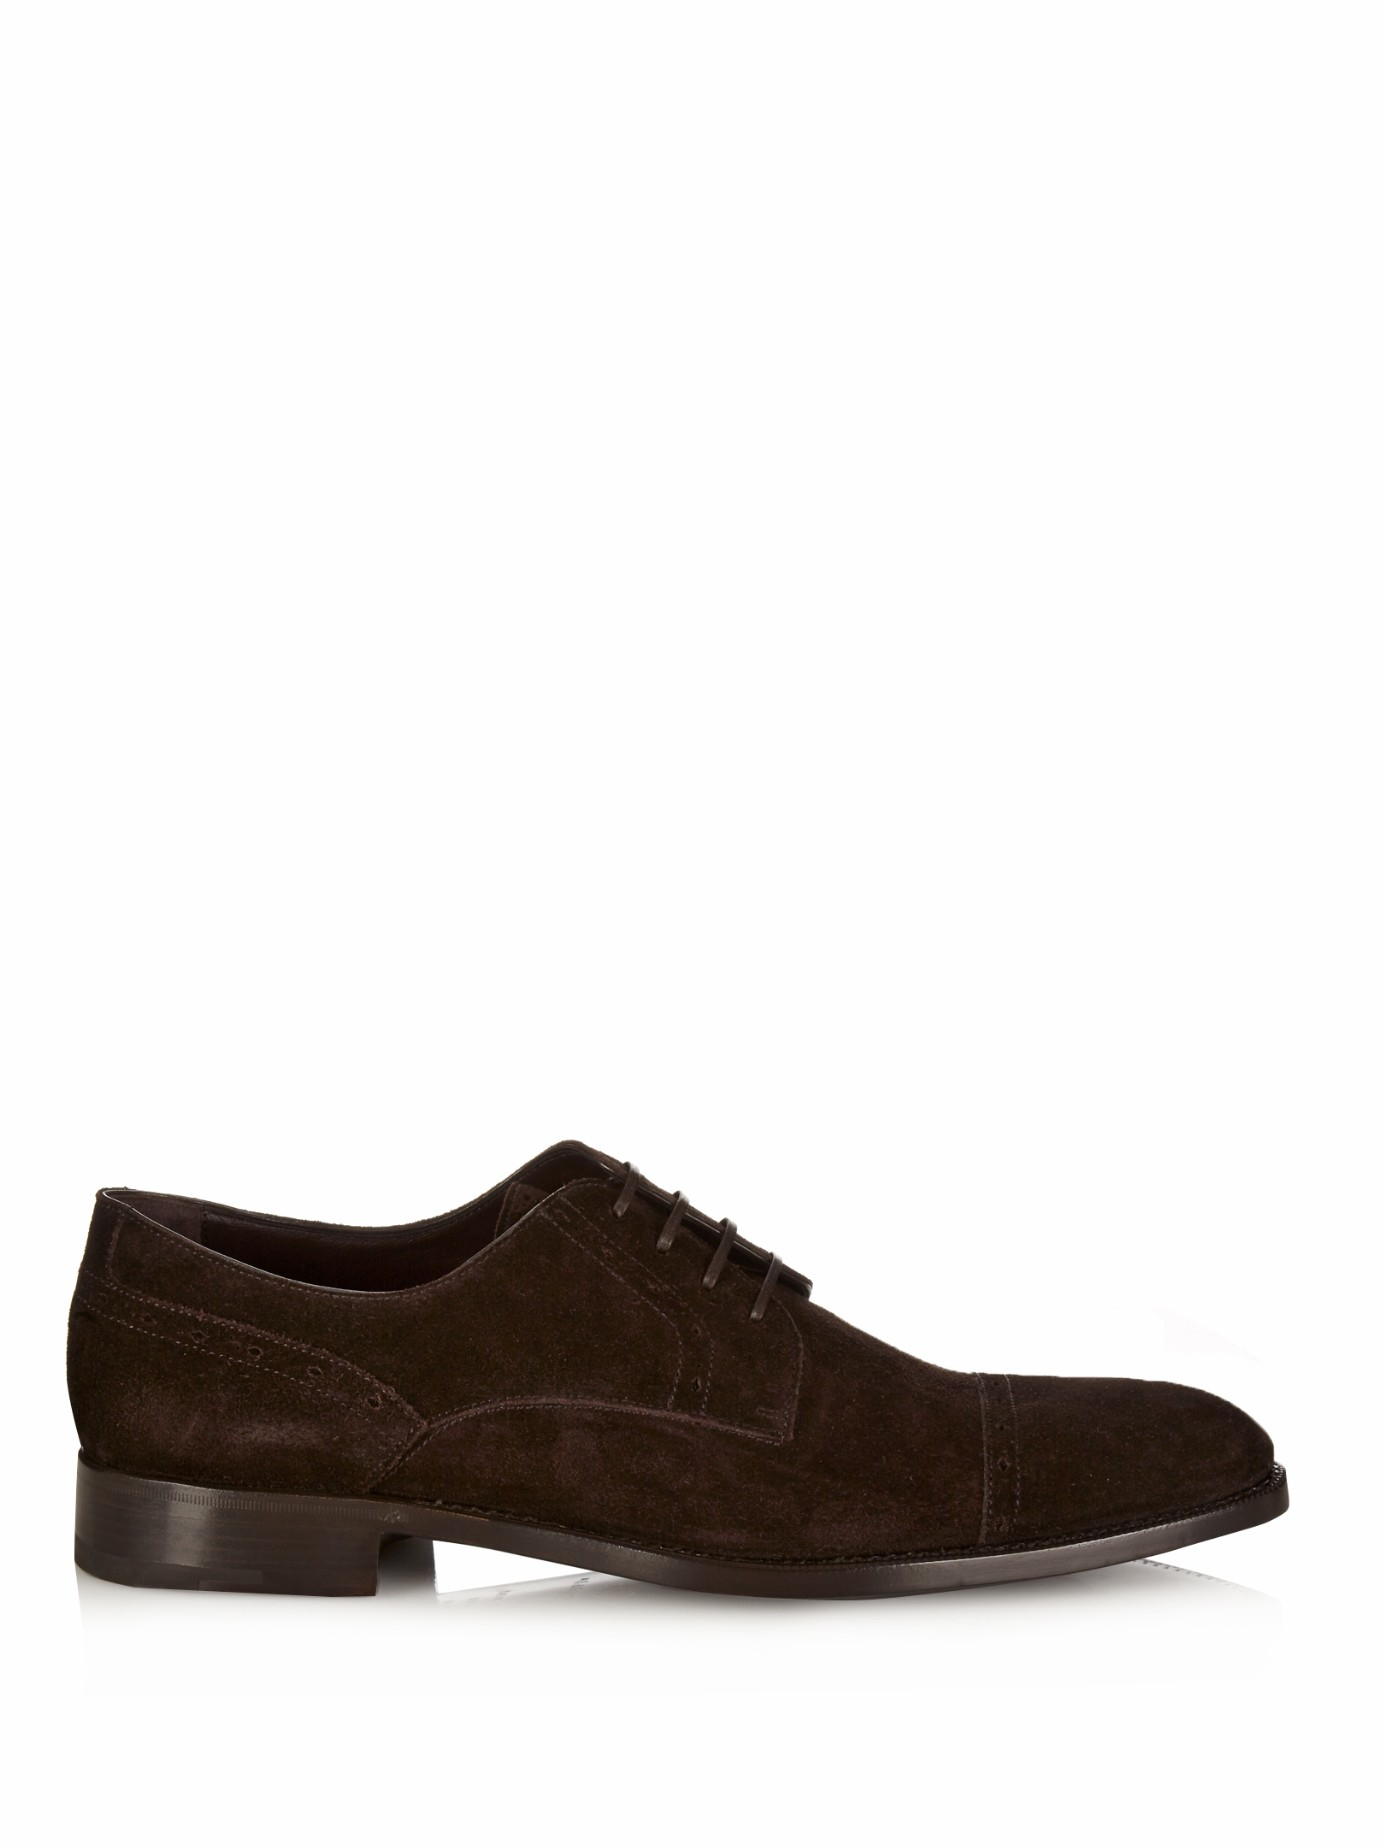 Lyst - Ermenegildo Zegna Lace-Up Suede Oxford Shoes in Brown for Men